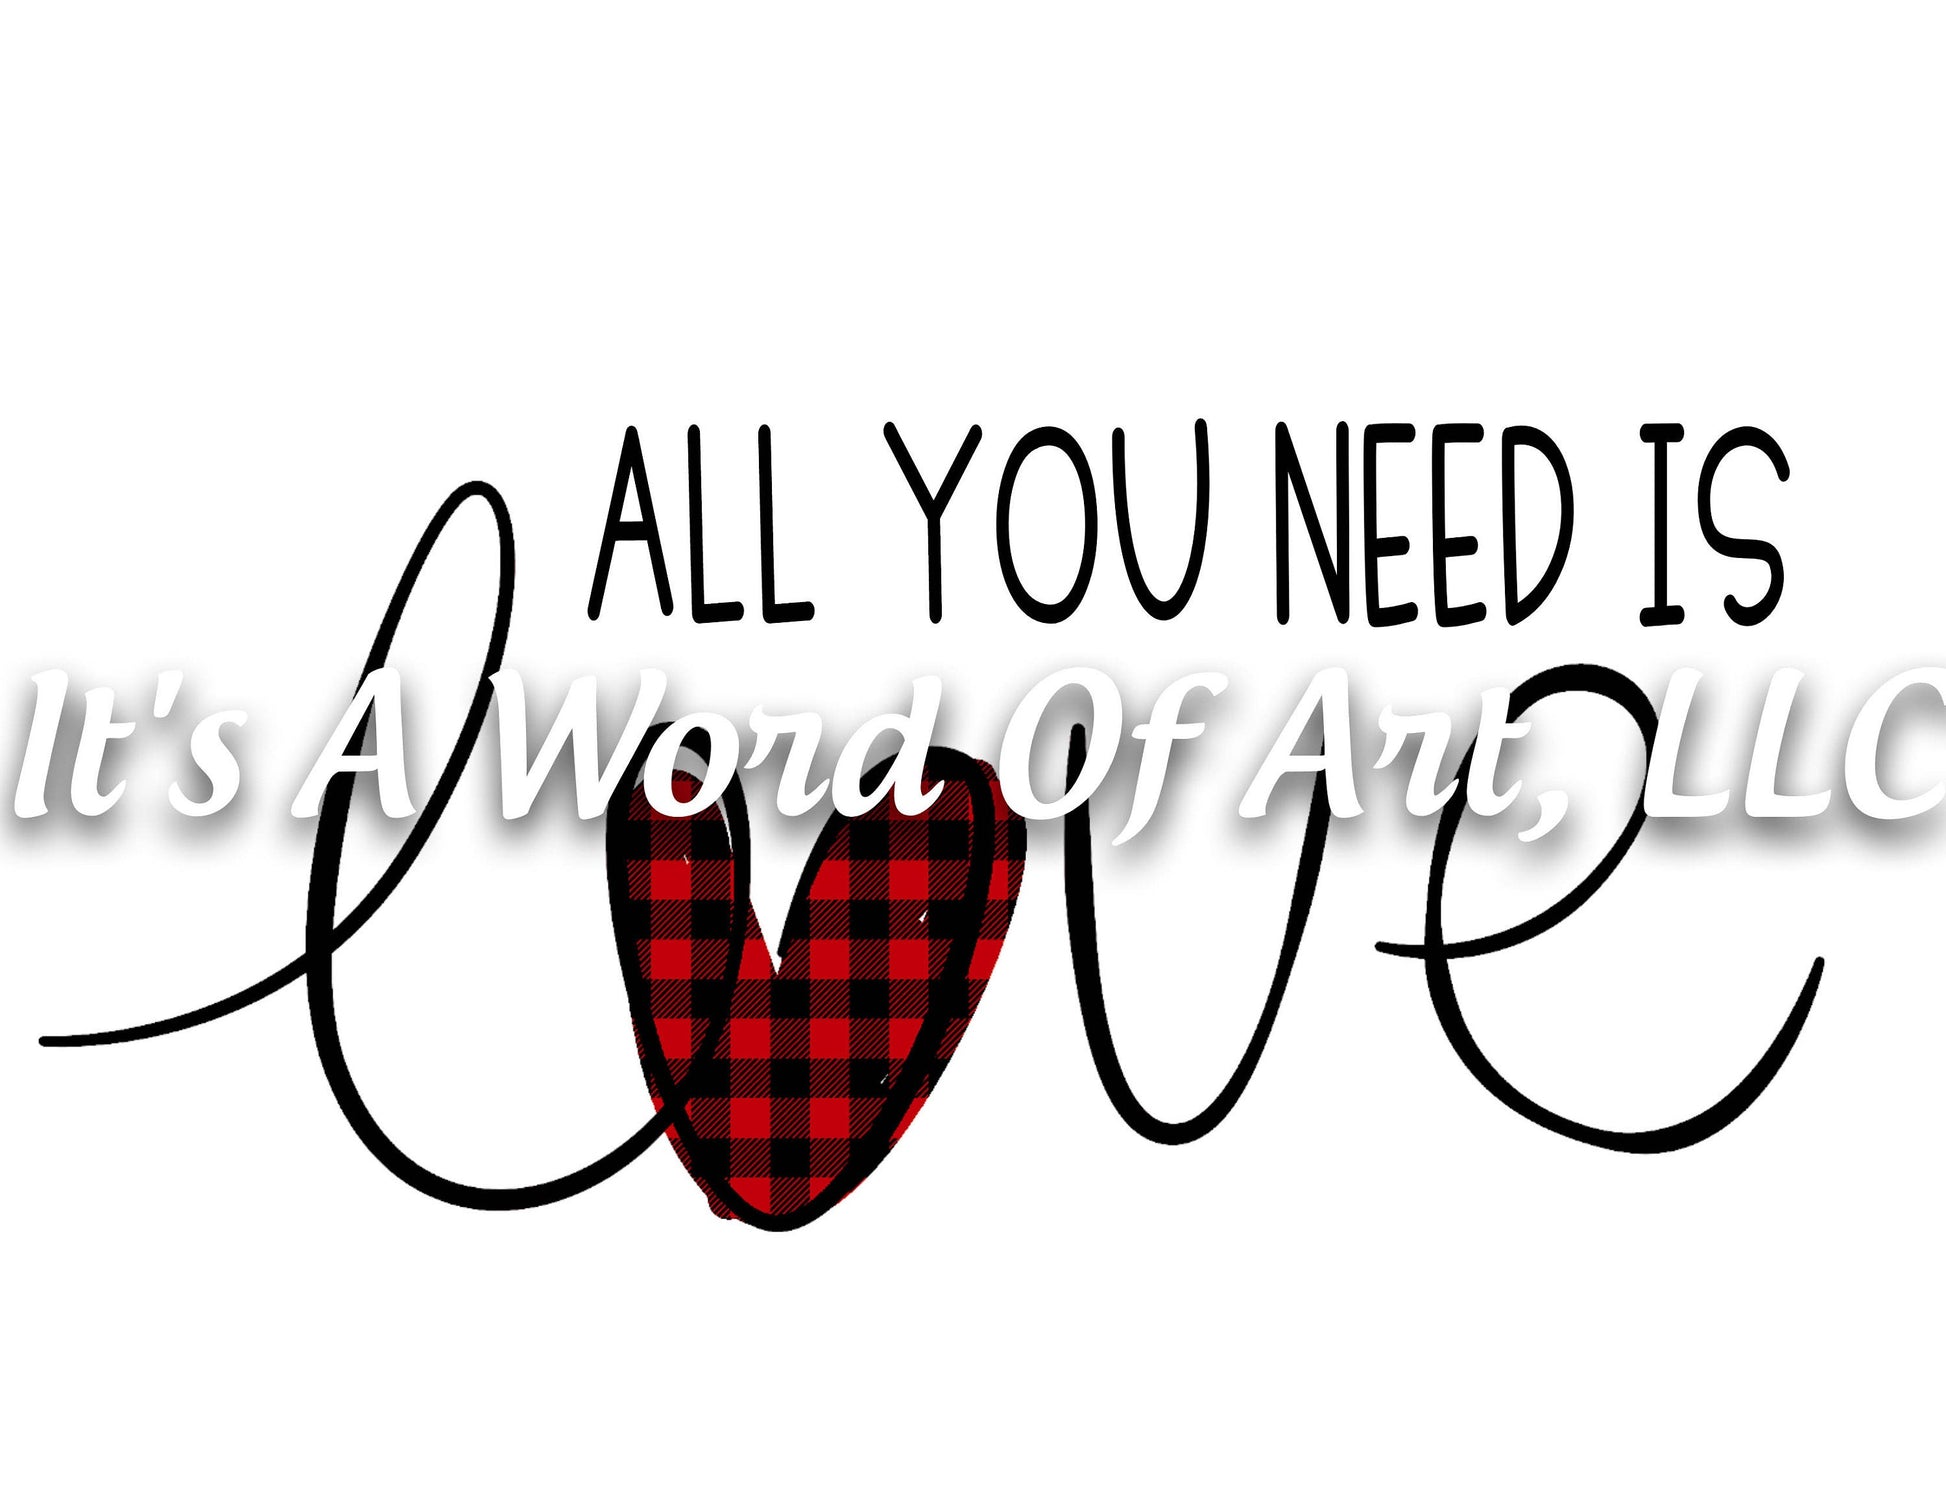 Valentines Day 9 - All You Need is Love Plaid Hearts- Sublimation Transfer Set/Ready To Press Sublimation Transfer/Sublimation Transfer